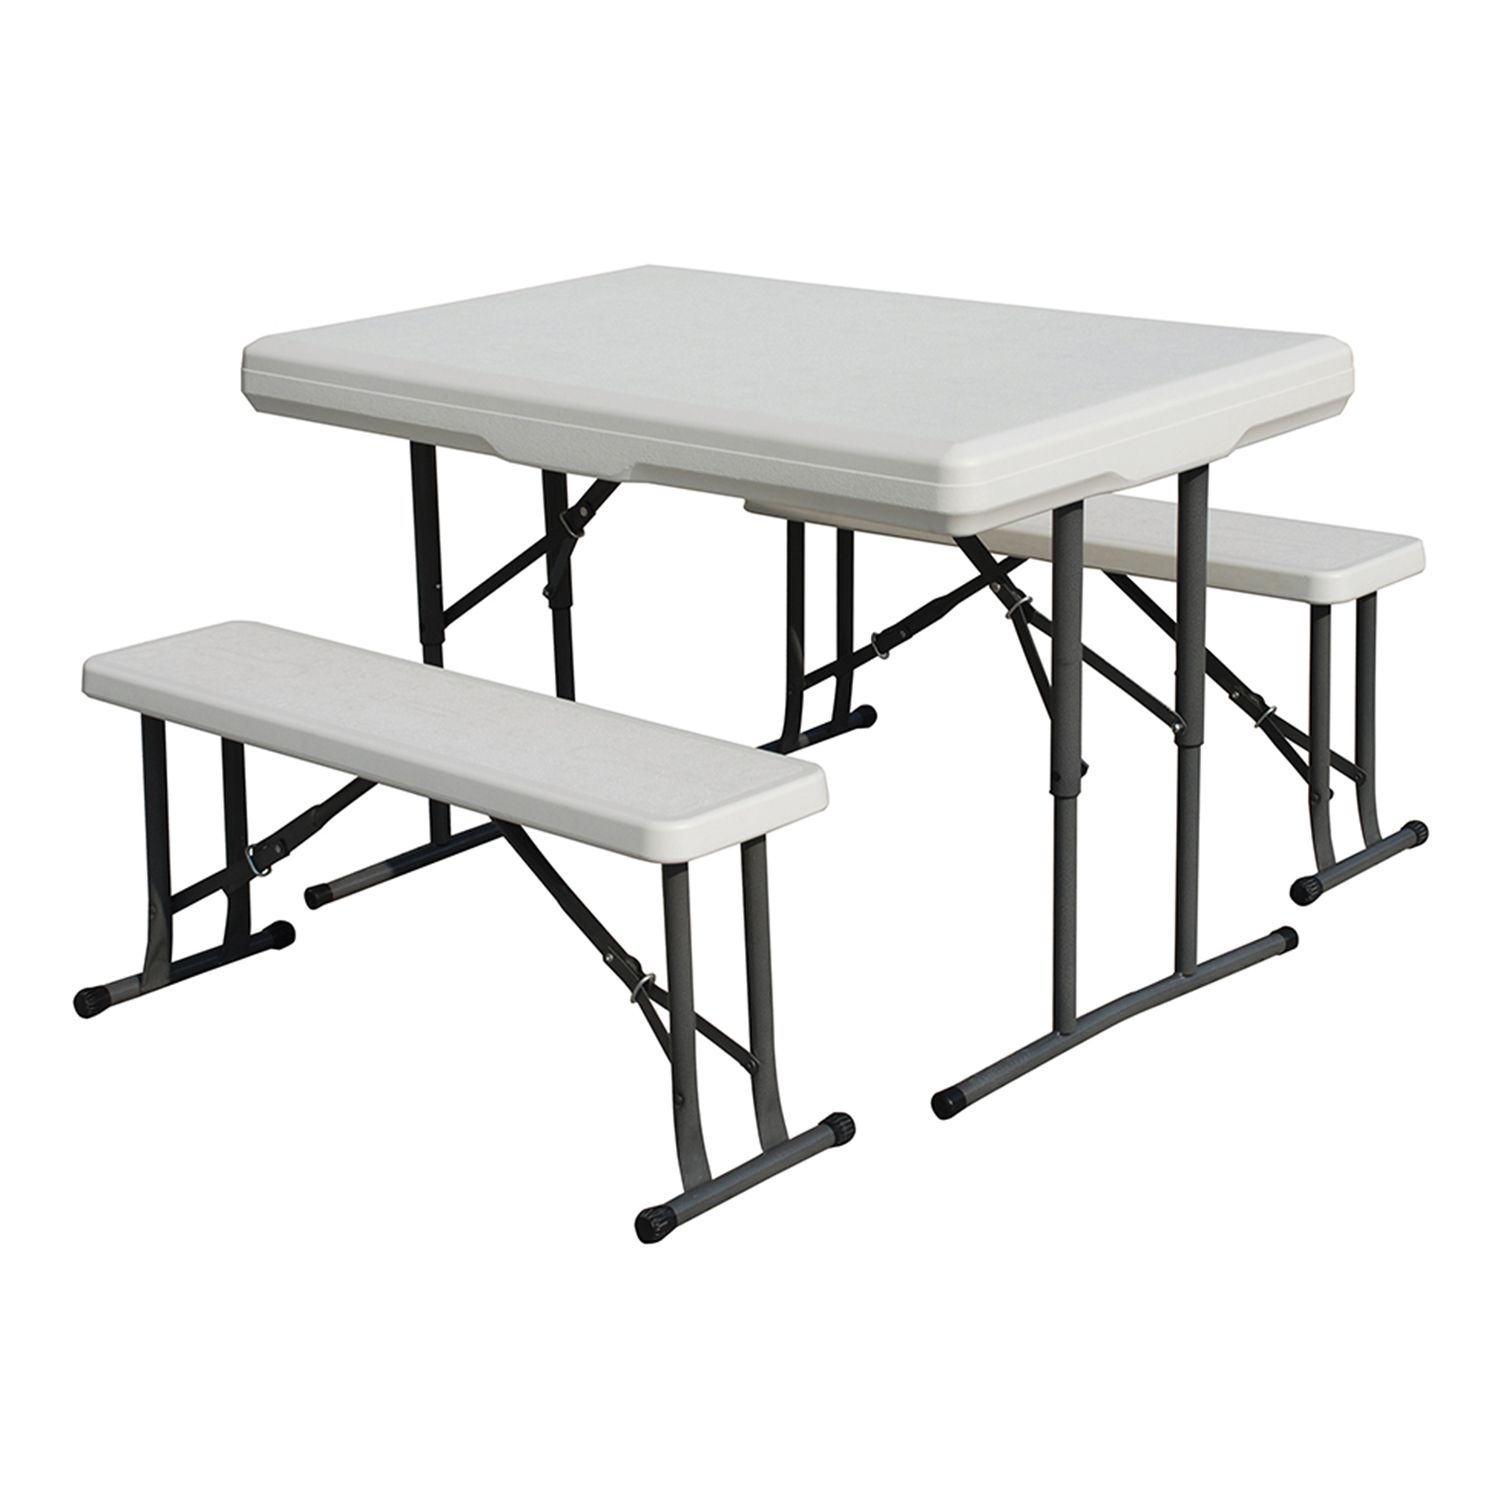 camping table with bench seats